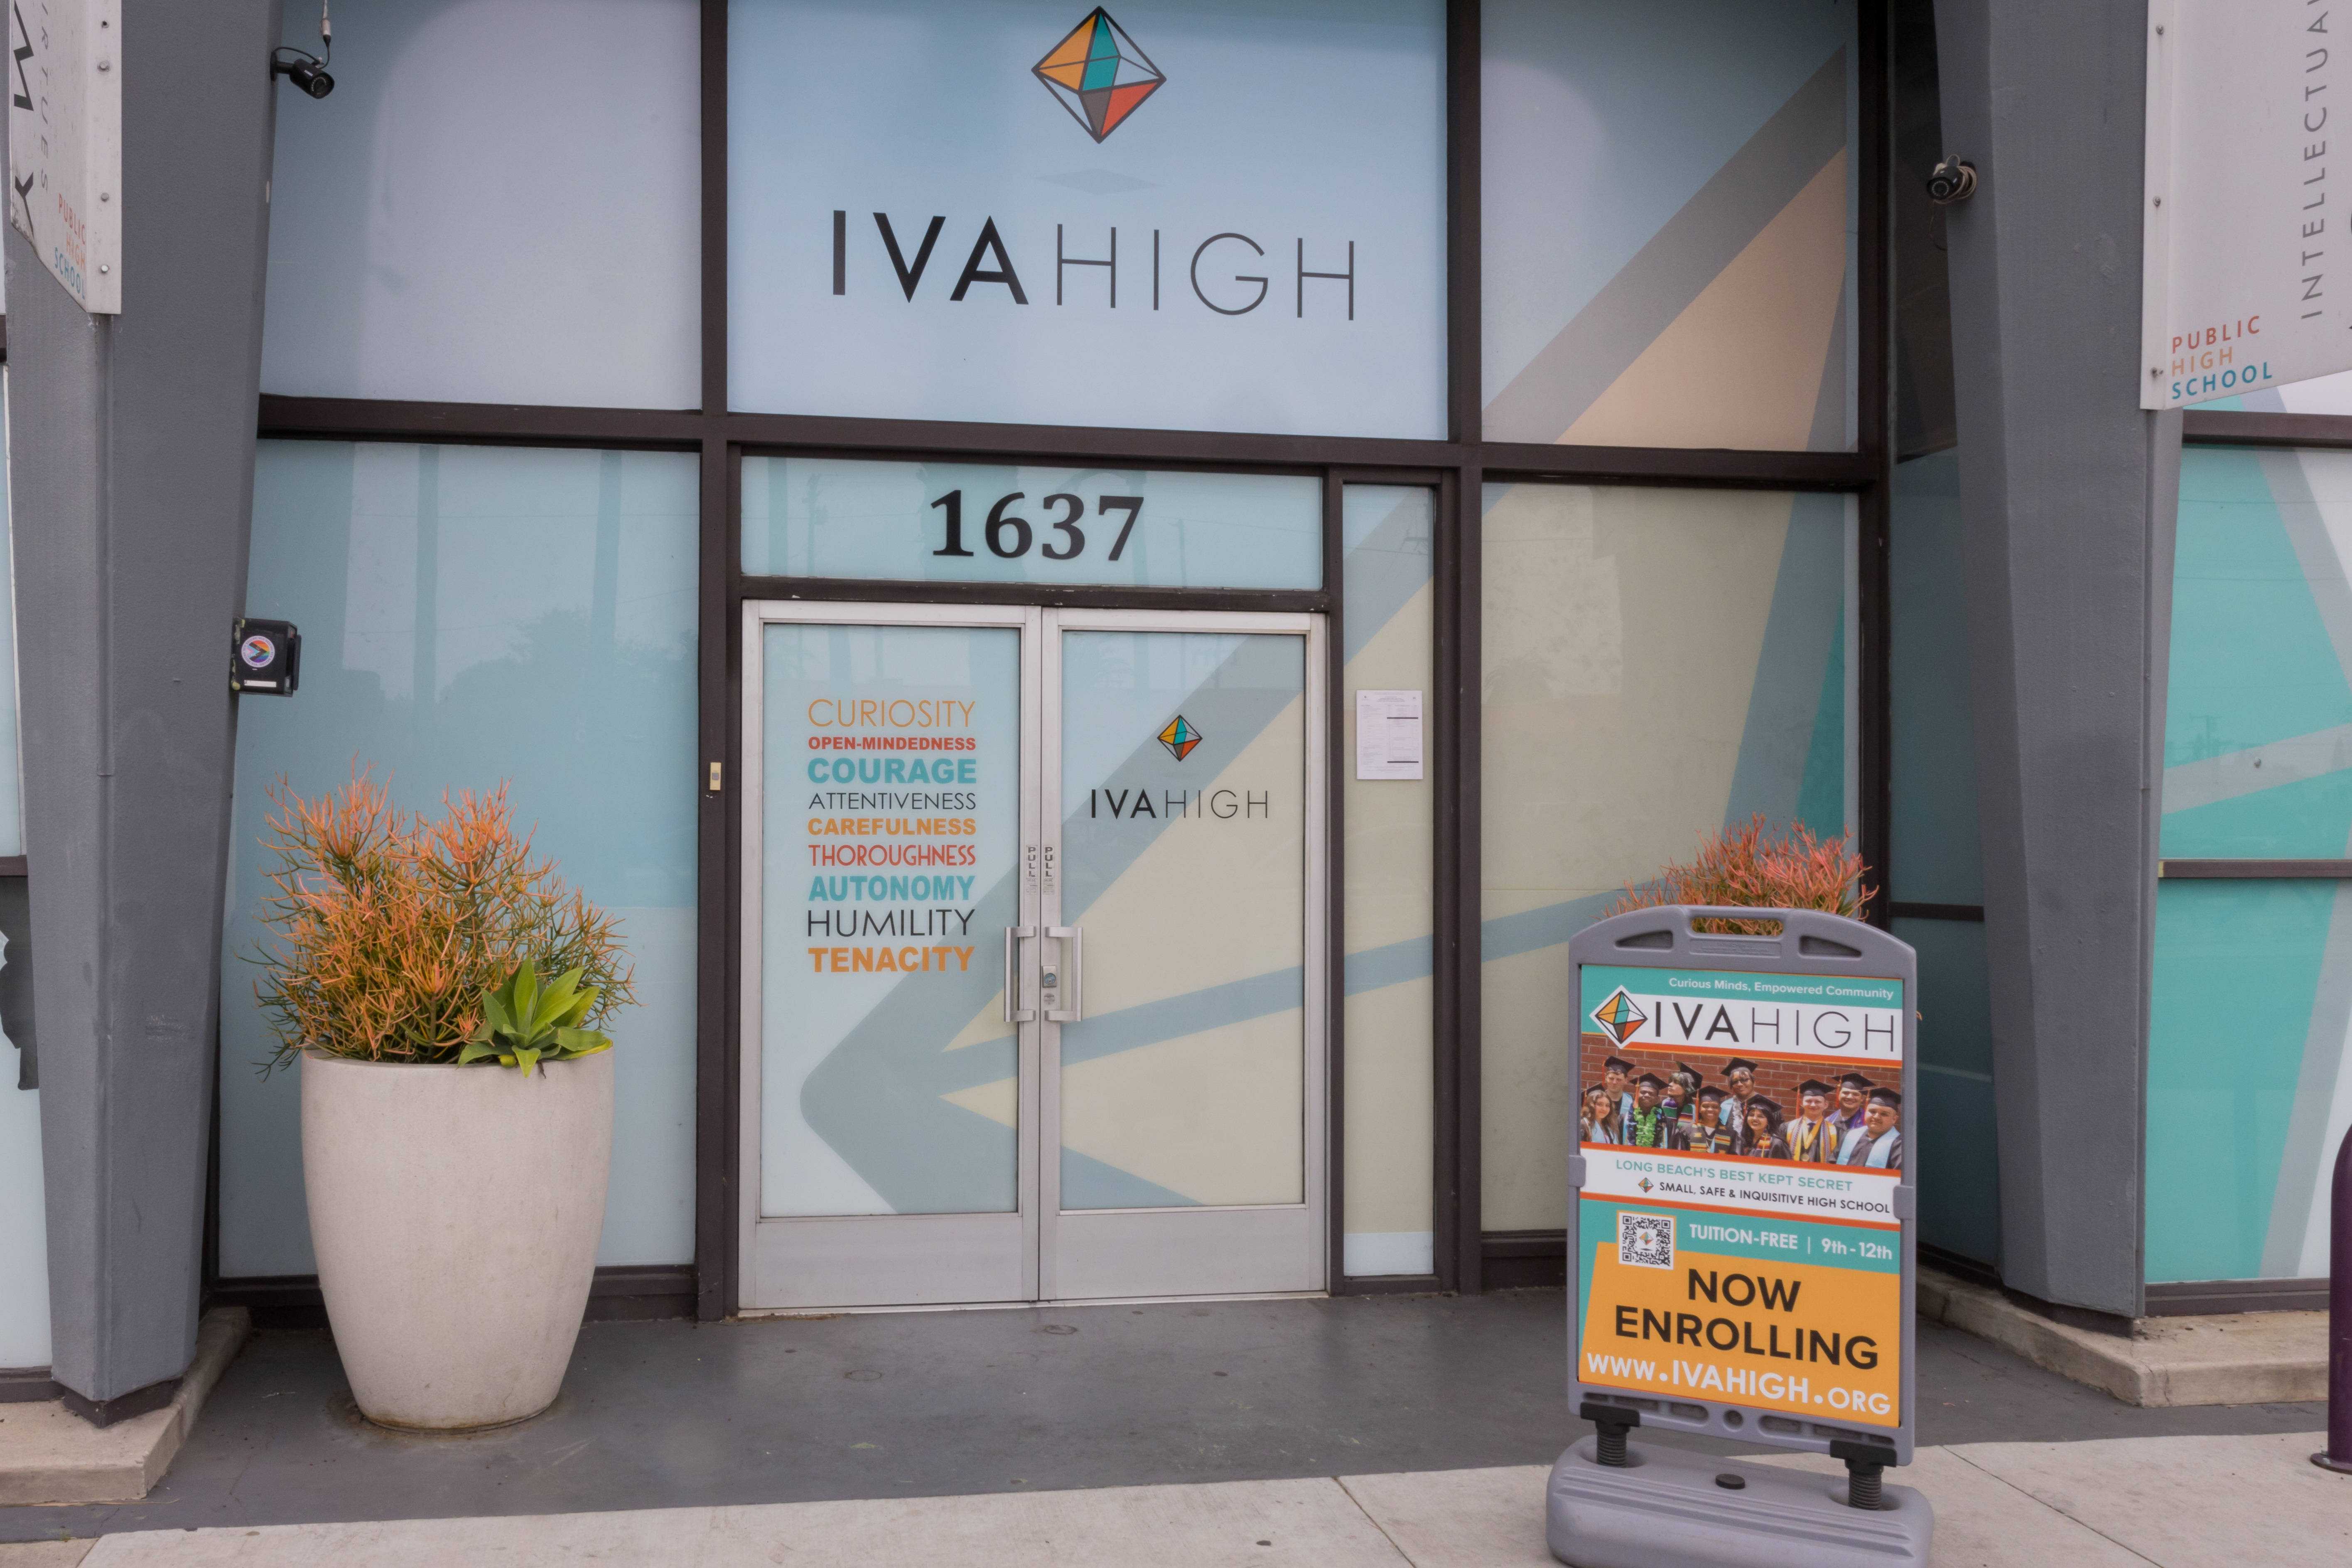 he front entrance of IVA High is brightly colored and a door sign lists the intellectual virtues